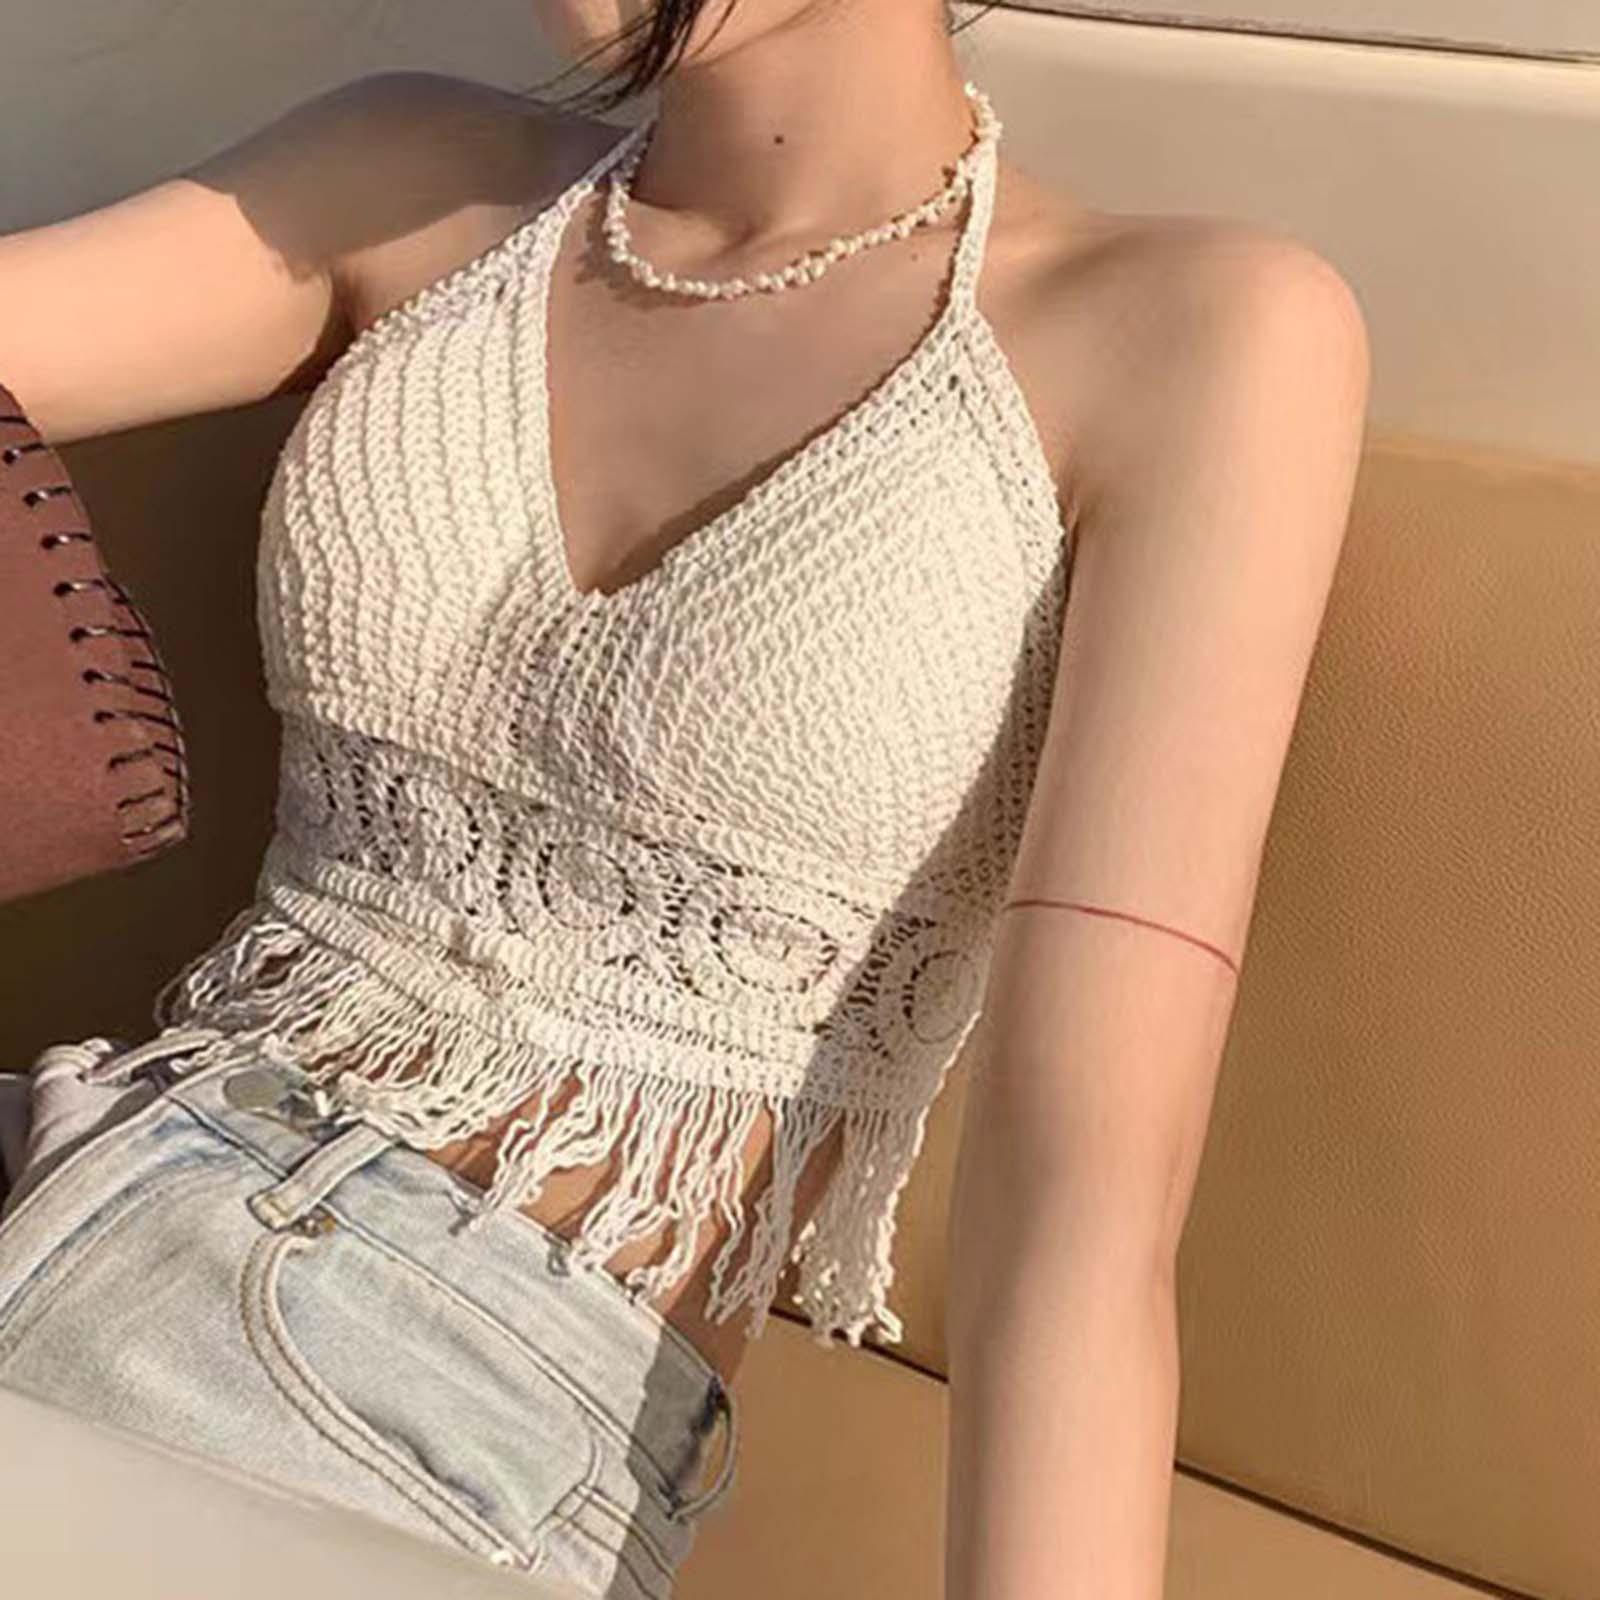 Fashionable Bohemia Crop Top Hollow Out Tank Camis Corset Vest Camisole Beach Wear Outfit Bra Tops for Women Festival Rave Nightclub Summer